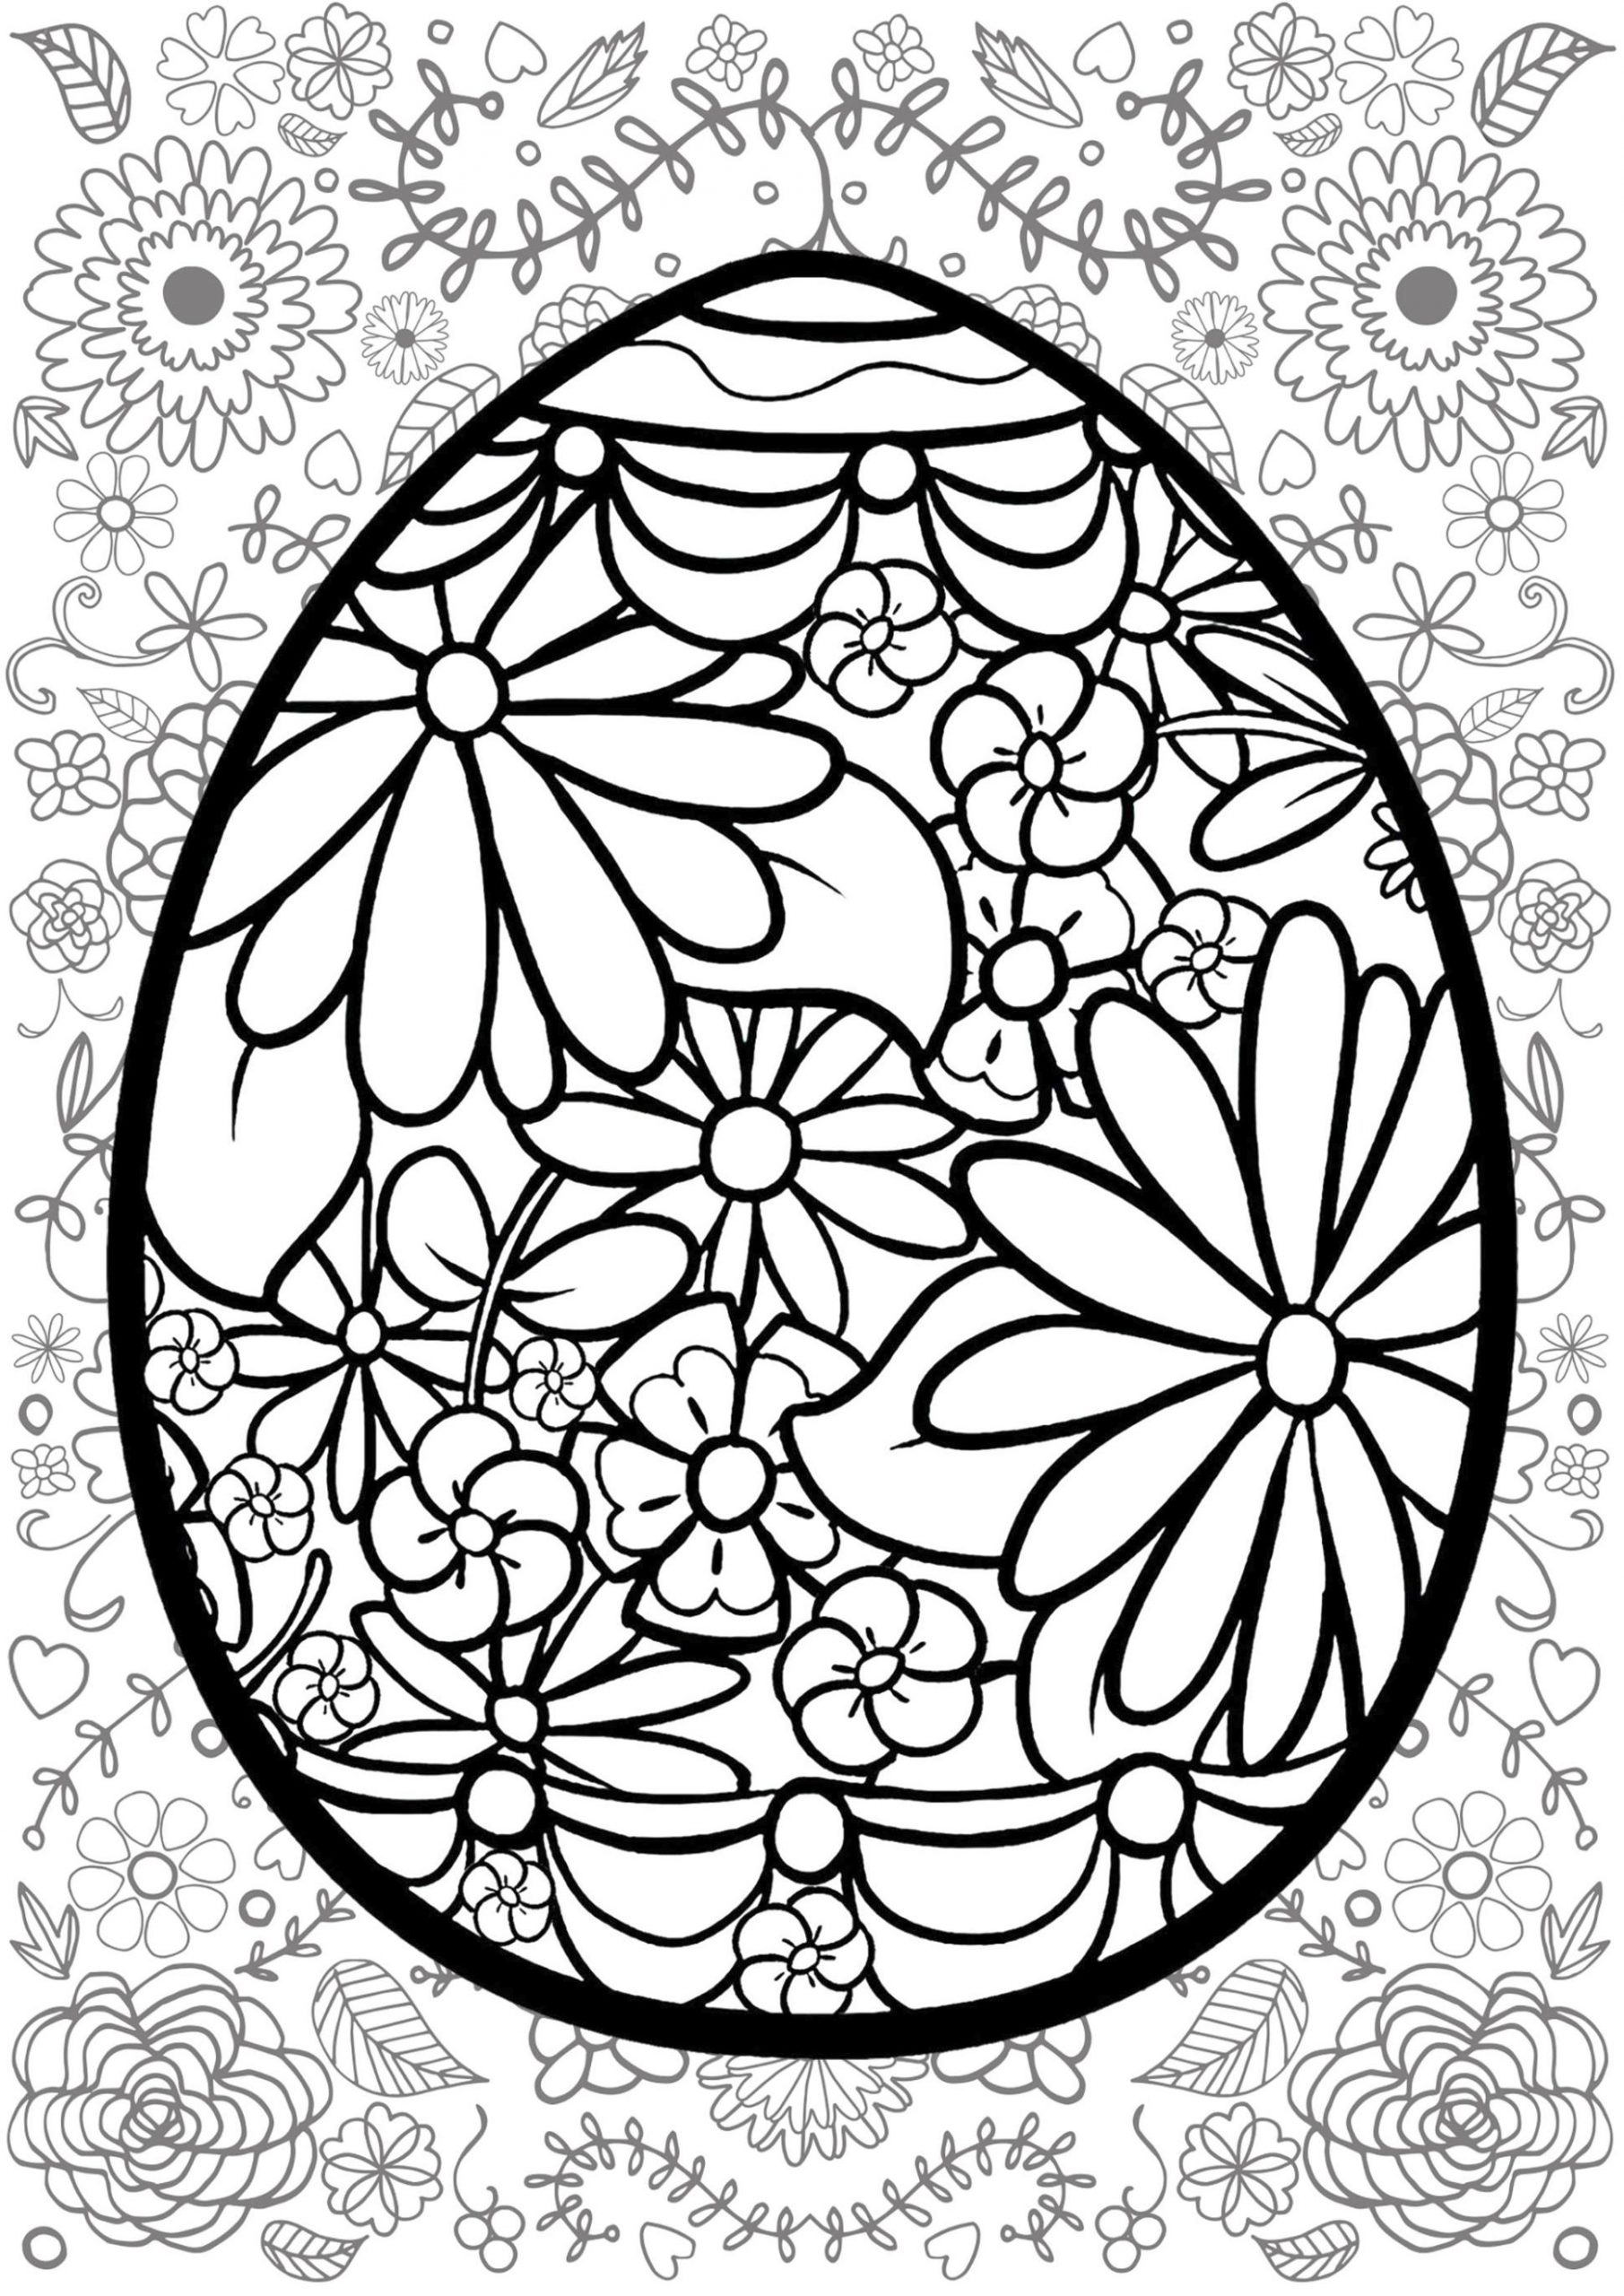 Get This Adult Easter Coloring Pages Easter Egg with Floral Pattern 